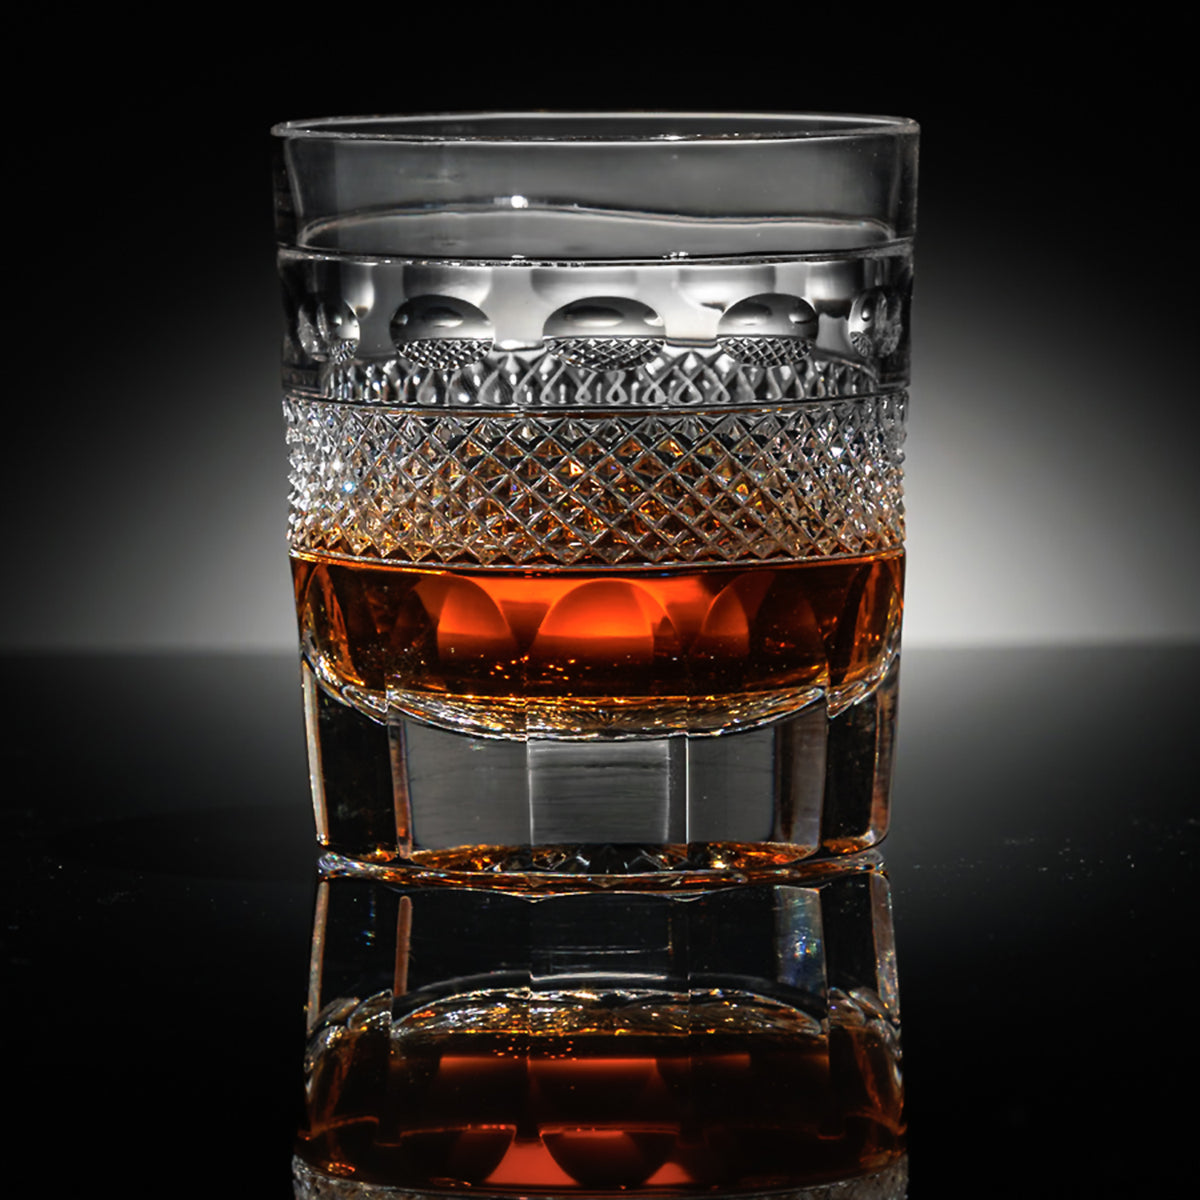 James Bond Grasmere Double Old Fashioned Tumbler - Casino Royale Edition - By Cumbria Crystal